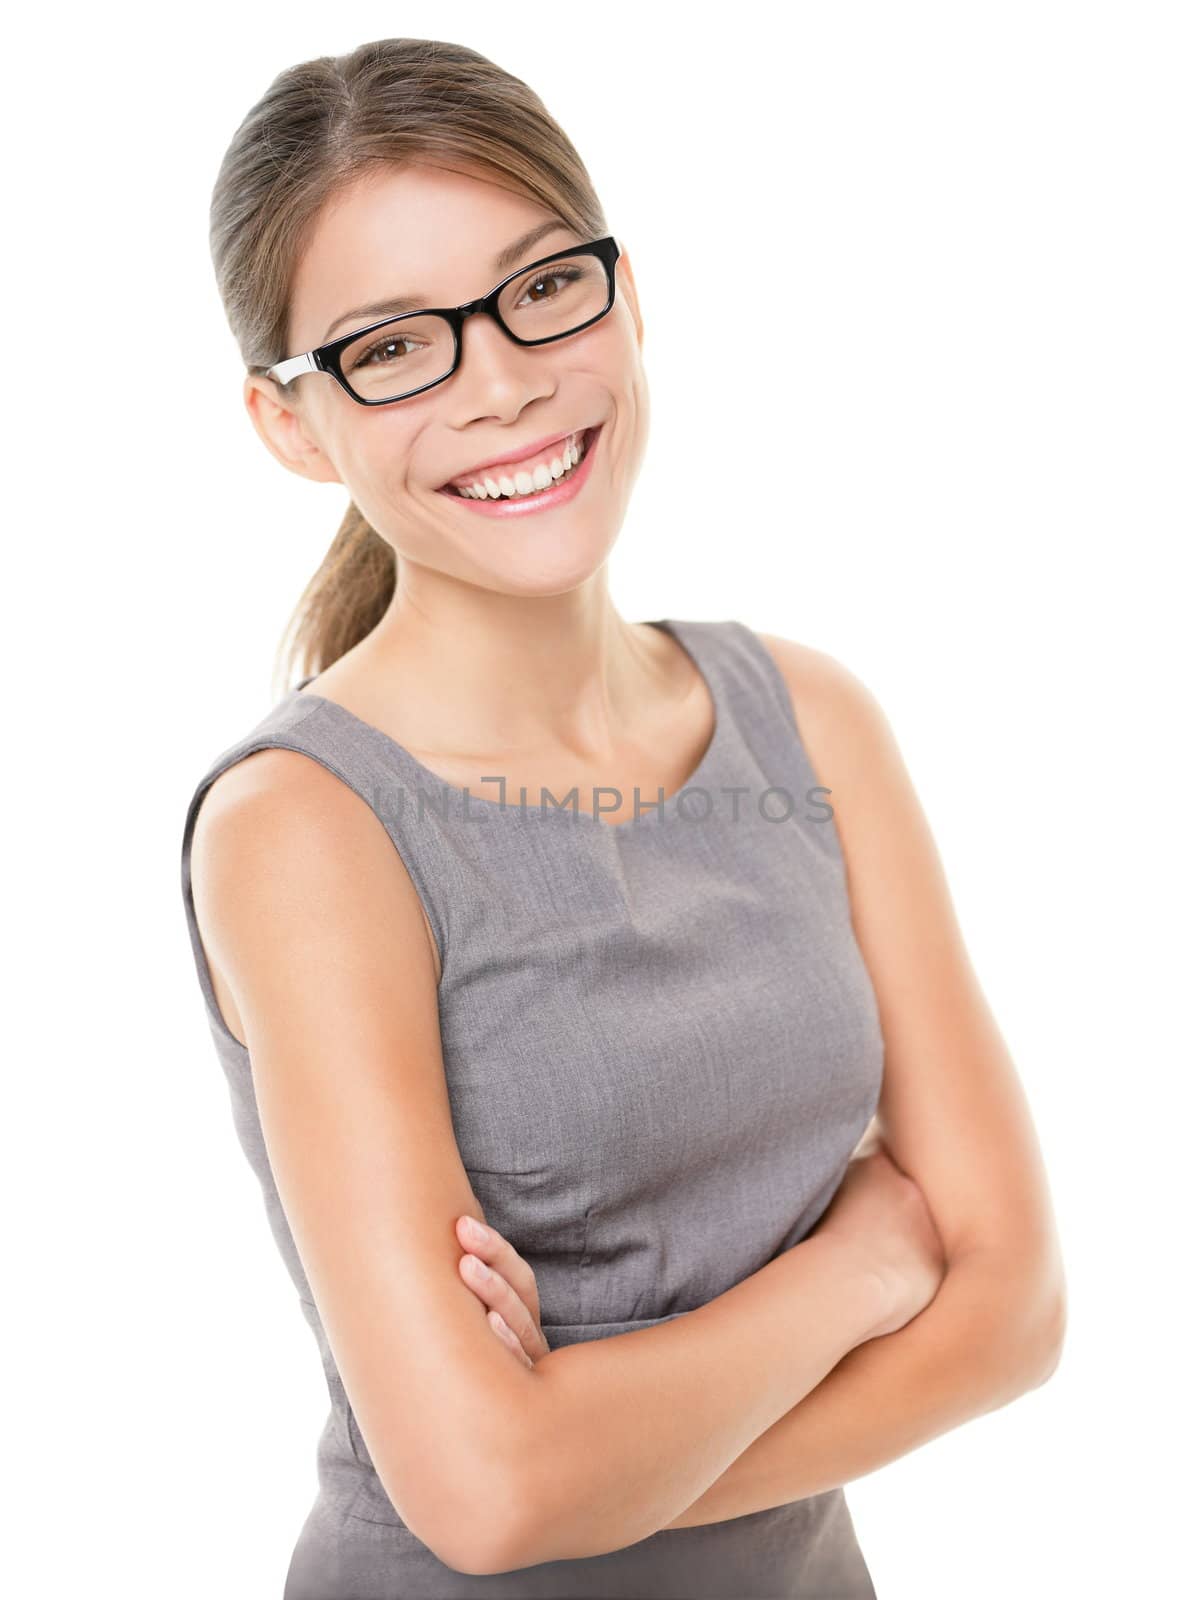 Woman wearing glasses eyewear. Portrait of young female professinal business woman wearing glasses looking at camera smiling happy. Multiracial woman model isolated on white background..